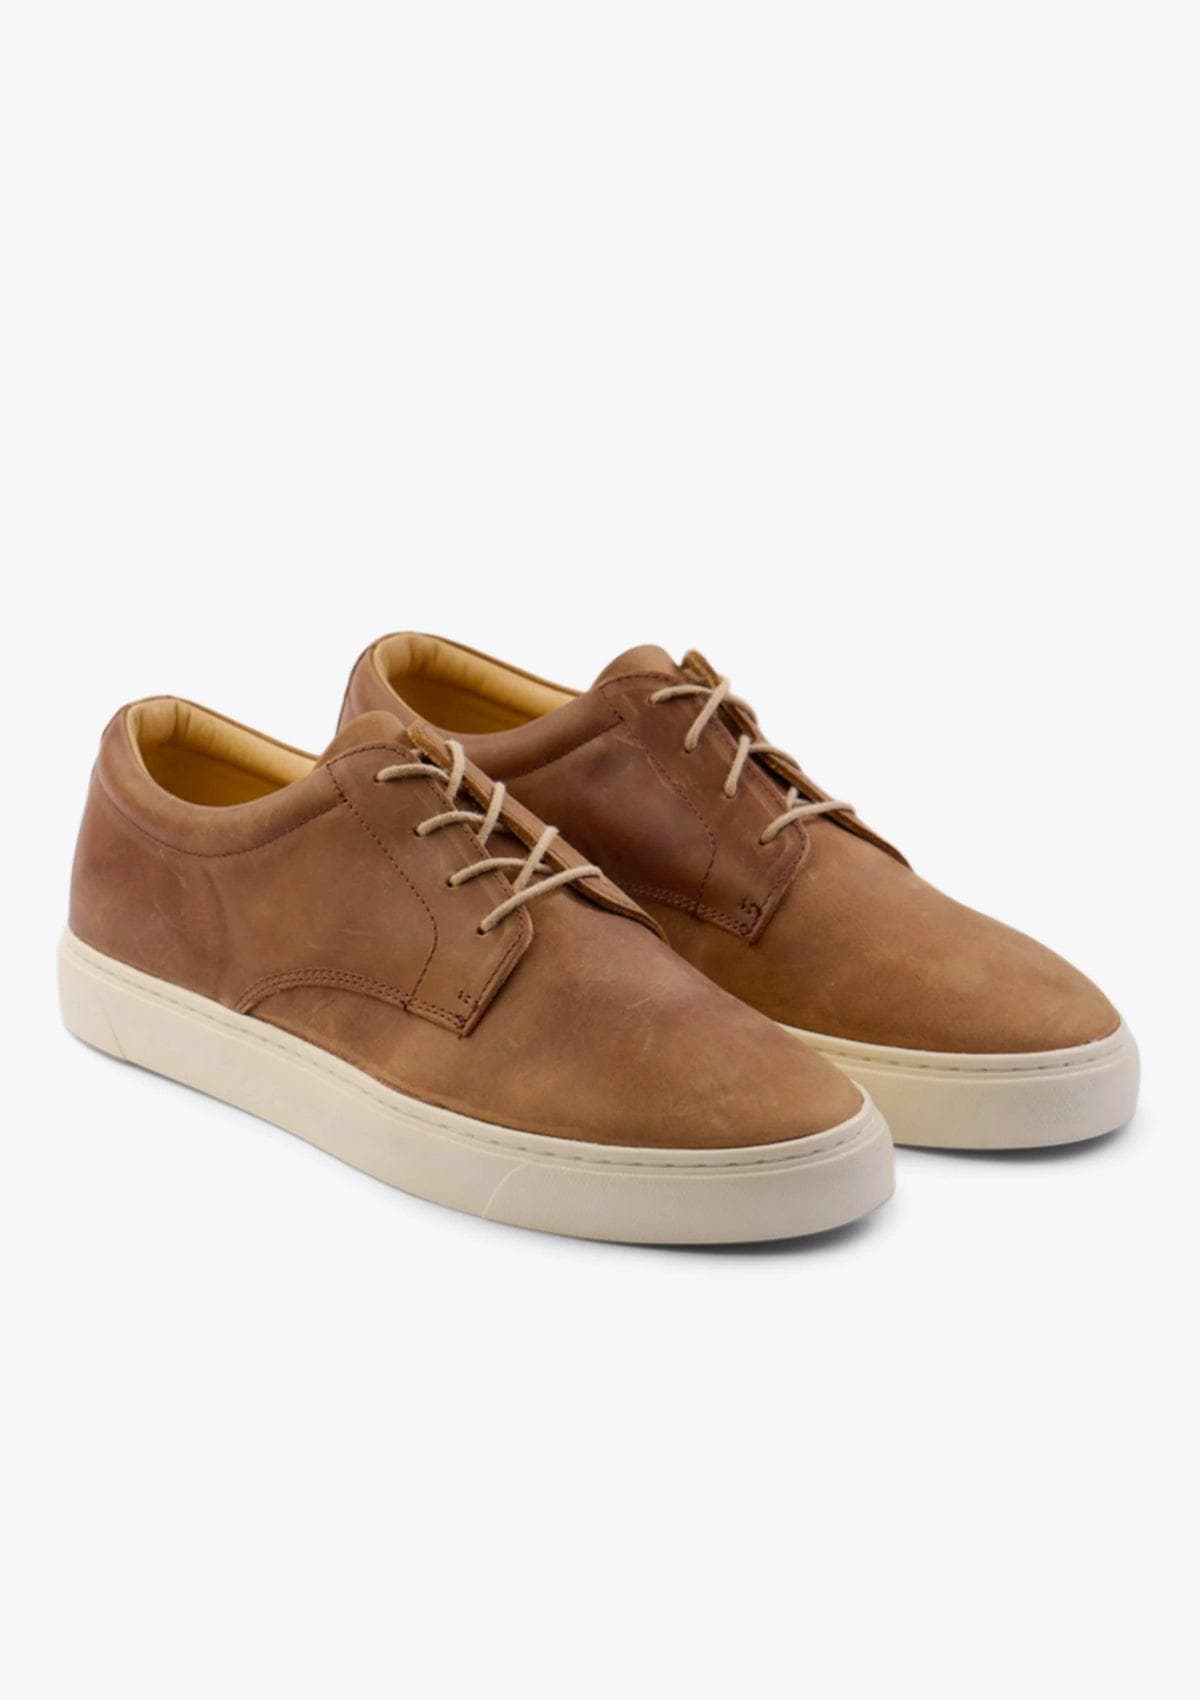 Nisolo Everyday Low Top Sneaker - Tobacco